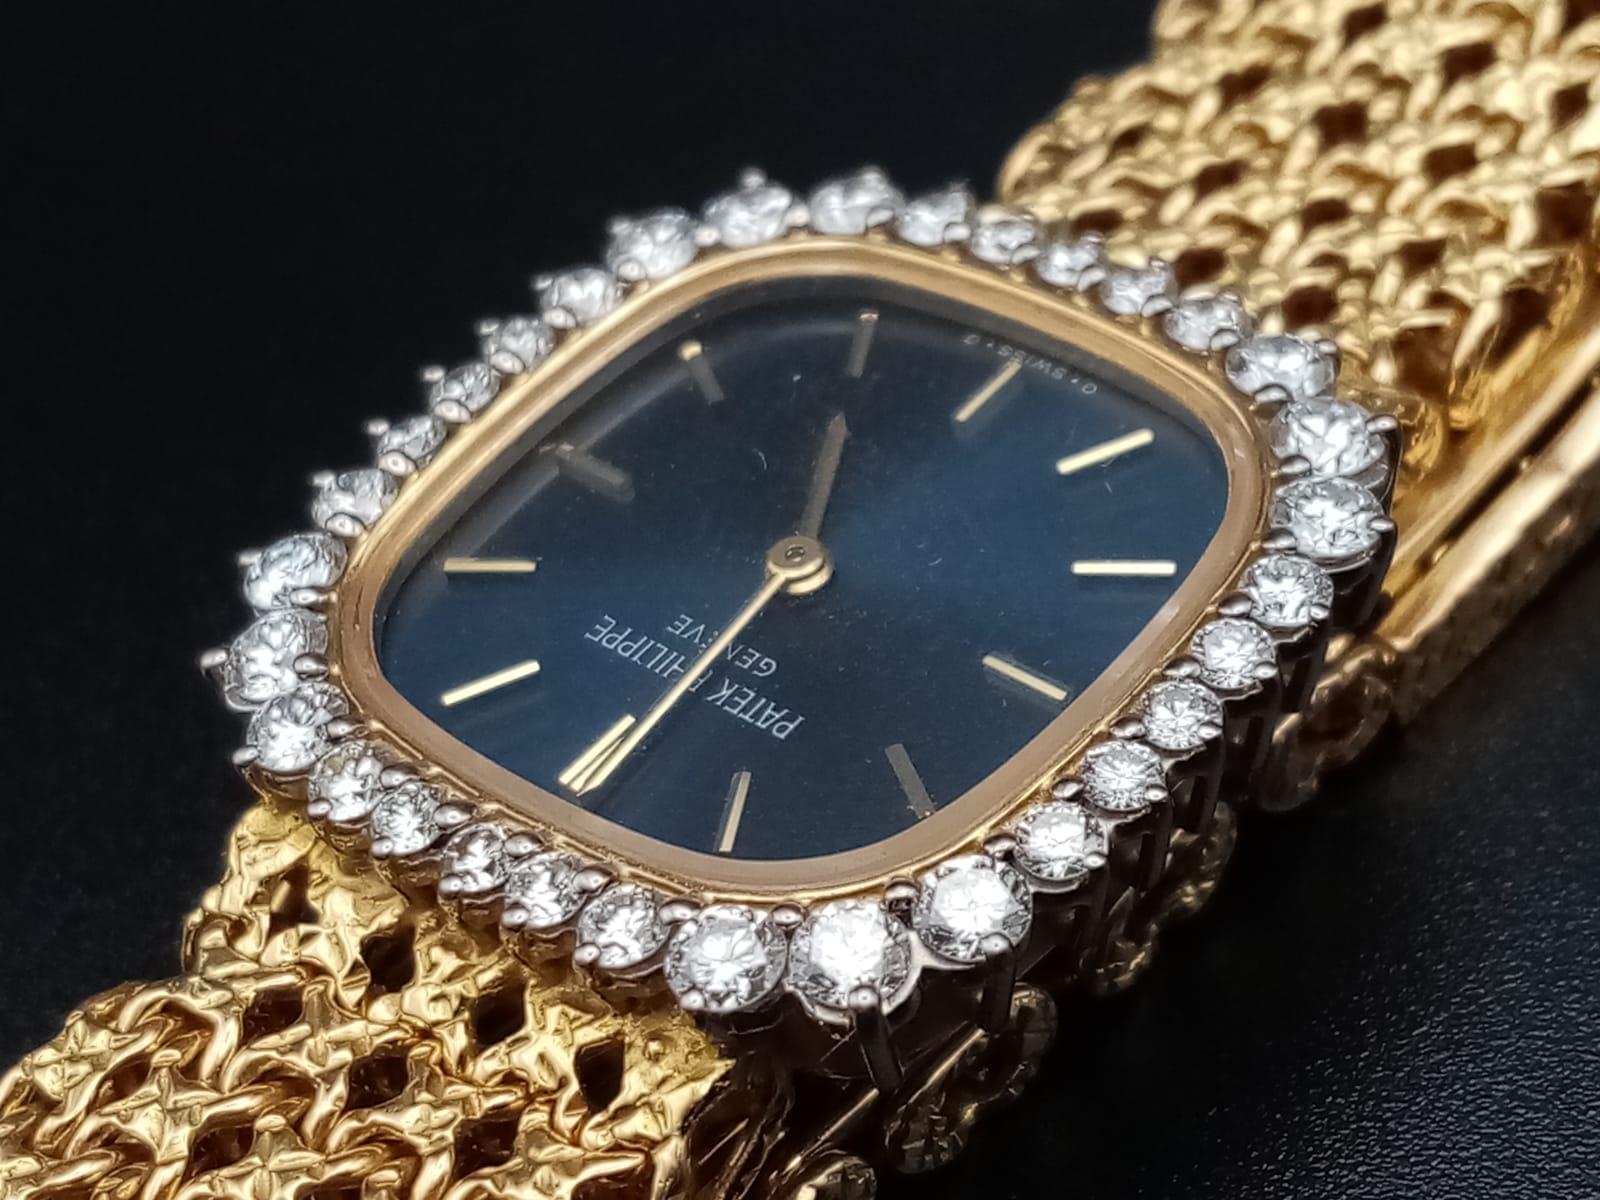 A Patek Phillipe Classic 18K Gold and Diamond Ladies Watch. Woven gold bracelet. Gold case - 24mm. - Image 5 of 11